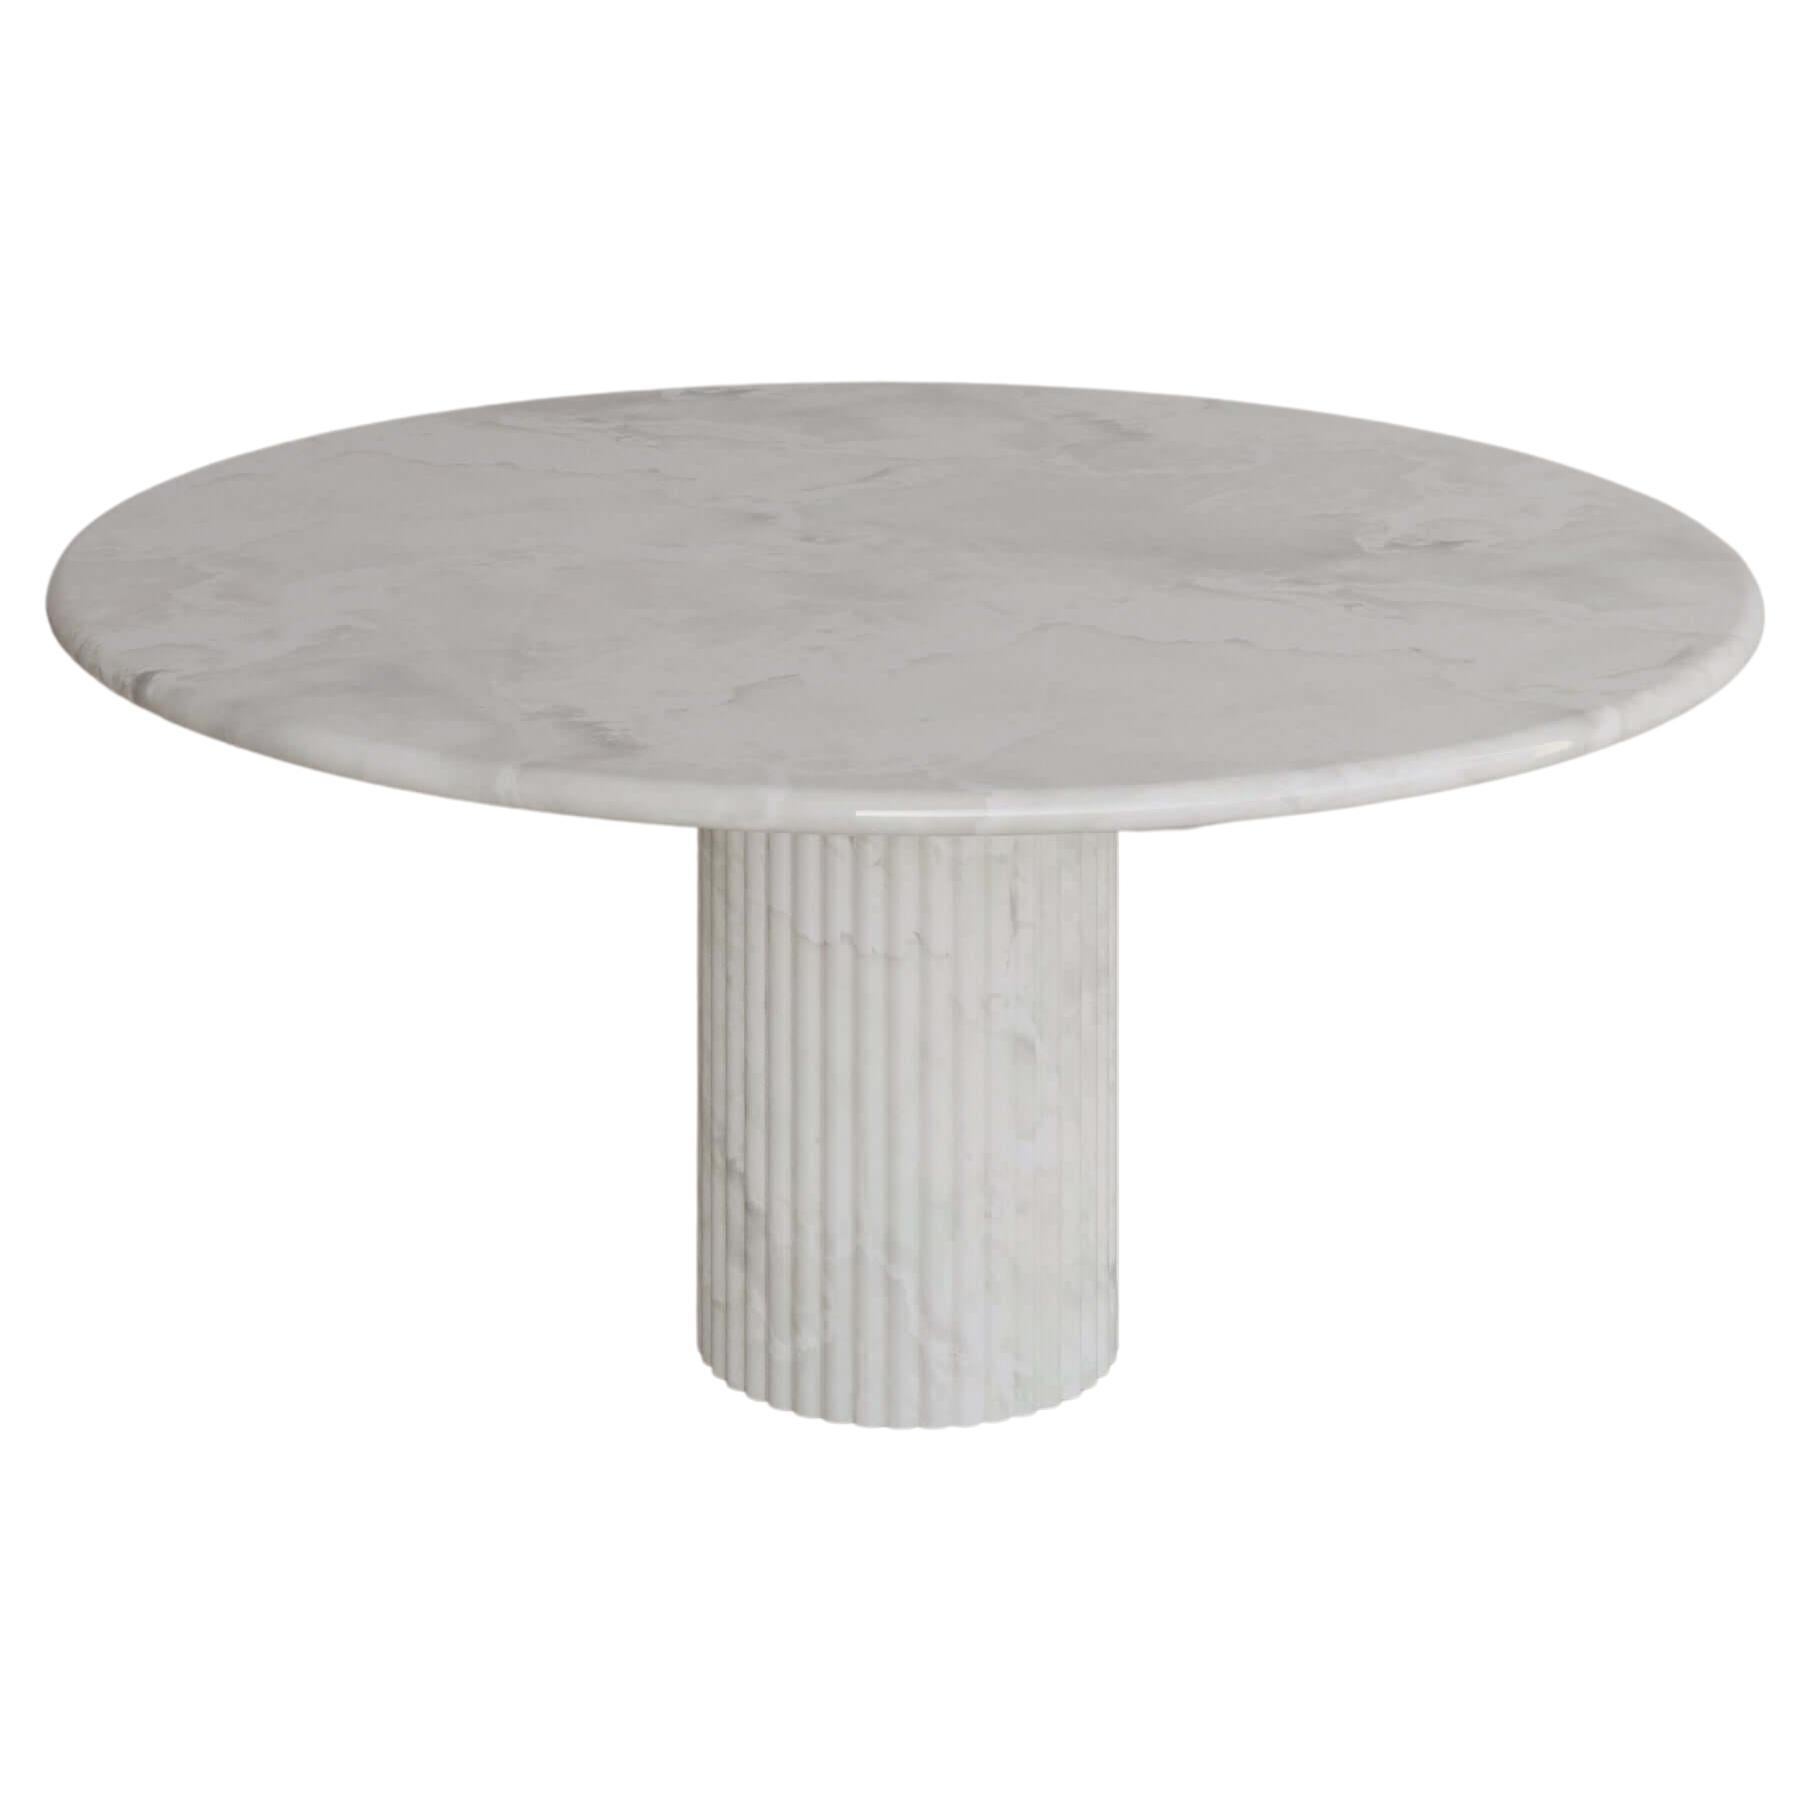 Bianco Onyx Antica Dining Table i by the Essentialist For Sale